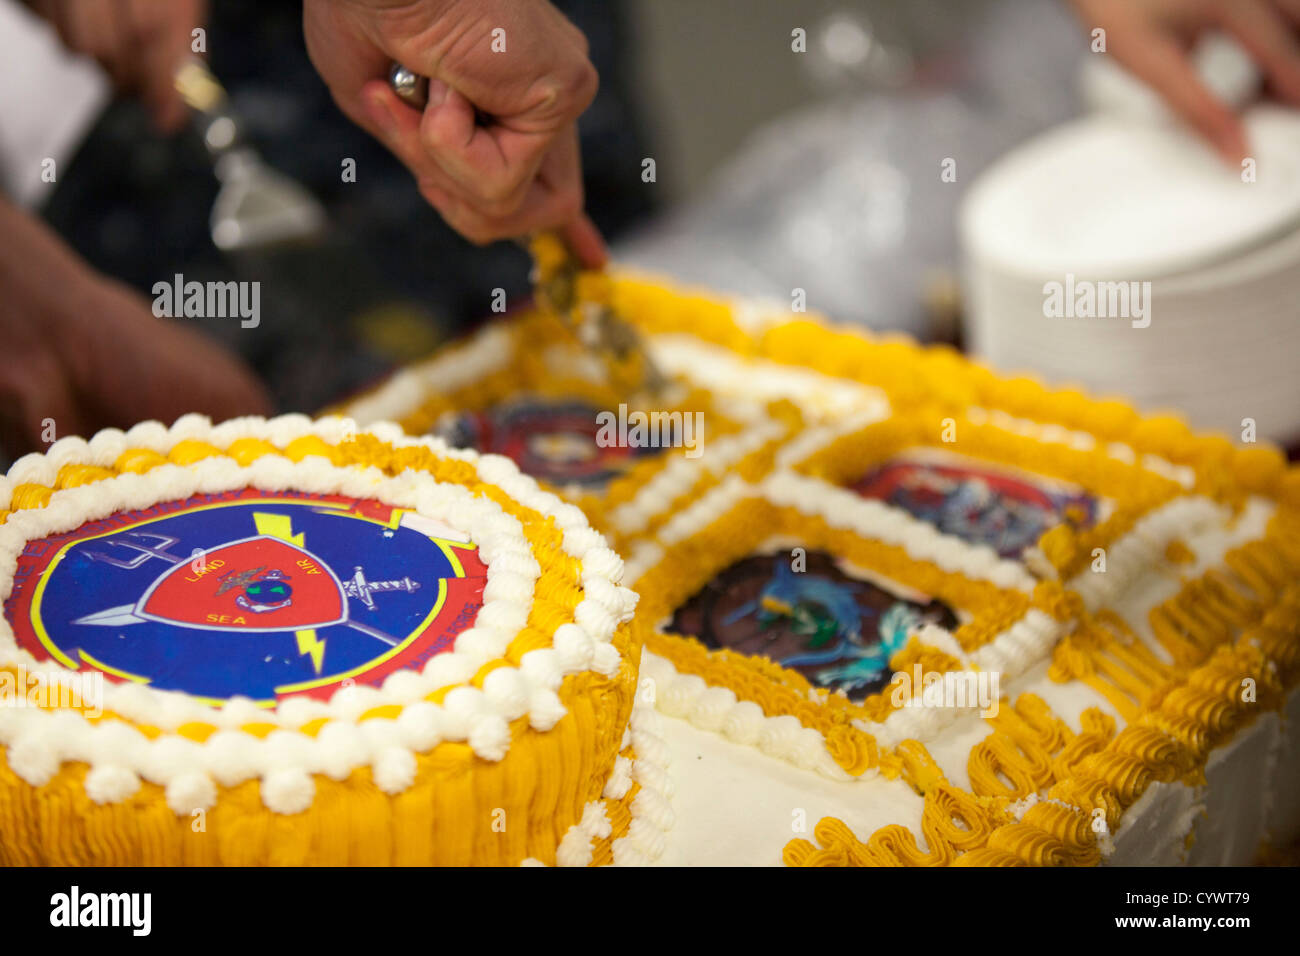 A birthday cake is cut and shared with the Marine and sailors assigned to the 26th Marine Expeditionary Unit (MEU) at a U.S. Mar Stock Photo